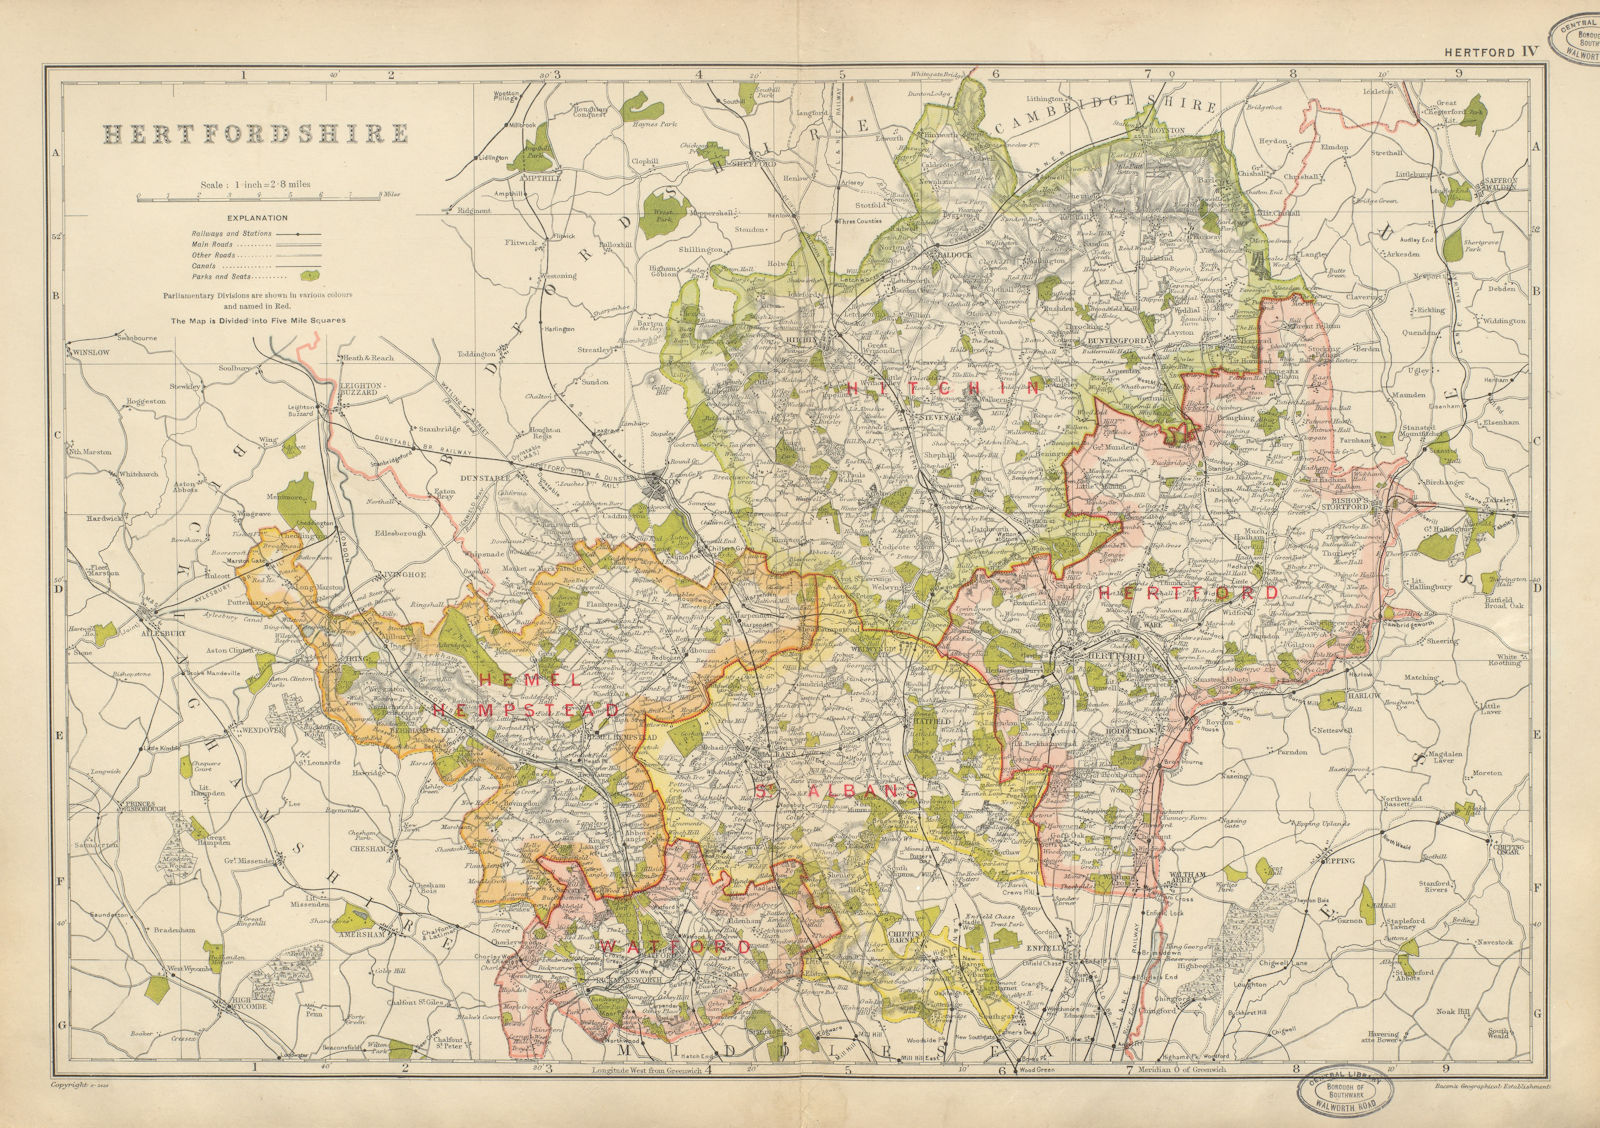 HERTFORDSHIRE. Showing Parliamentary divisions, parks & boroughs. BACON 1934 map